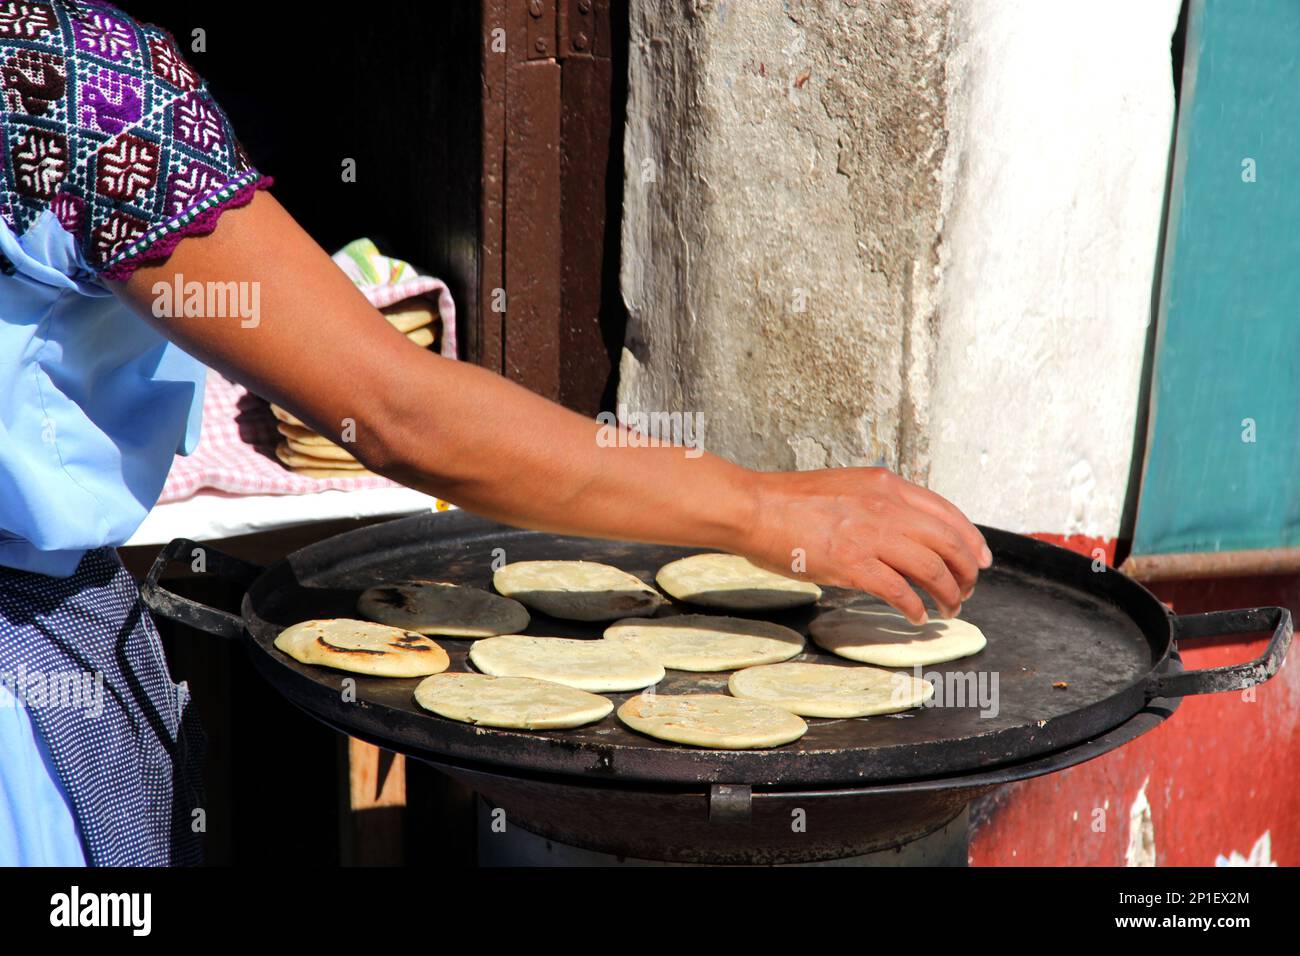 https://c8.alamy.com/comp/2P1EX2M/view-of-female-indigenous-hand-making-tortillas-on-comal-traditional-food-2P1EX2M.jpg